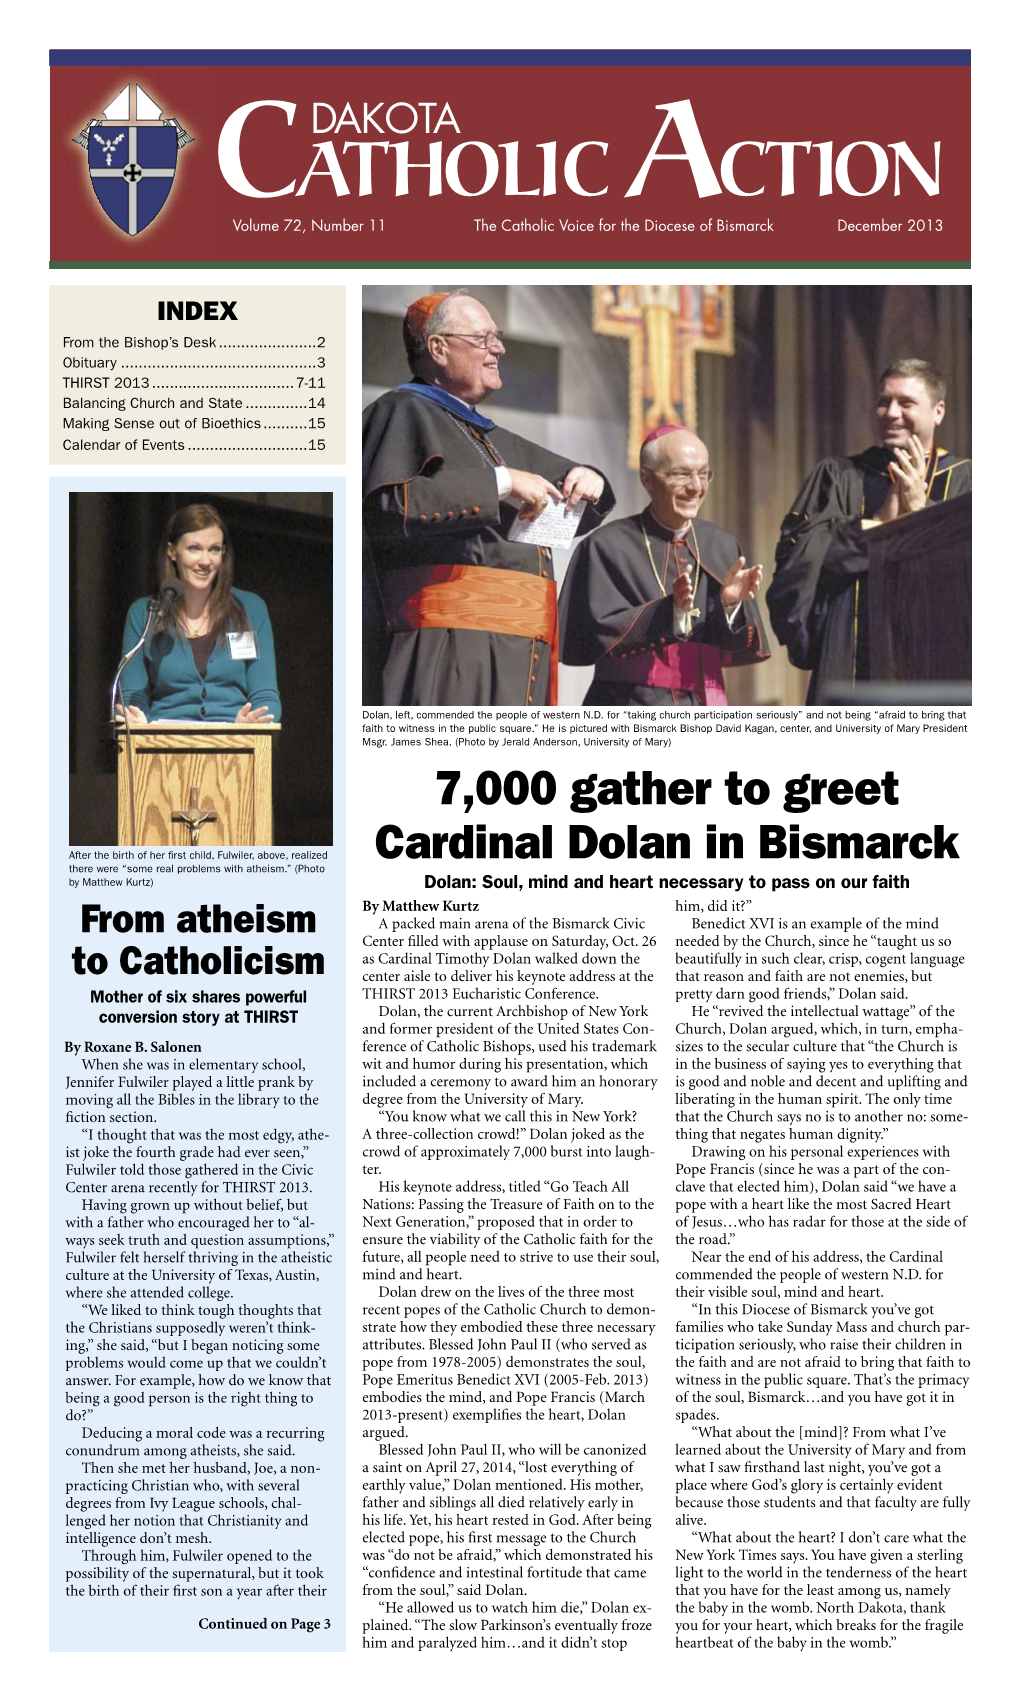 CATHOLIC ACTION Volume 72, Number 11 the Catholic Voice for the Diocese of Bismarck December 2013